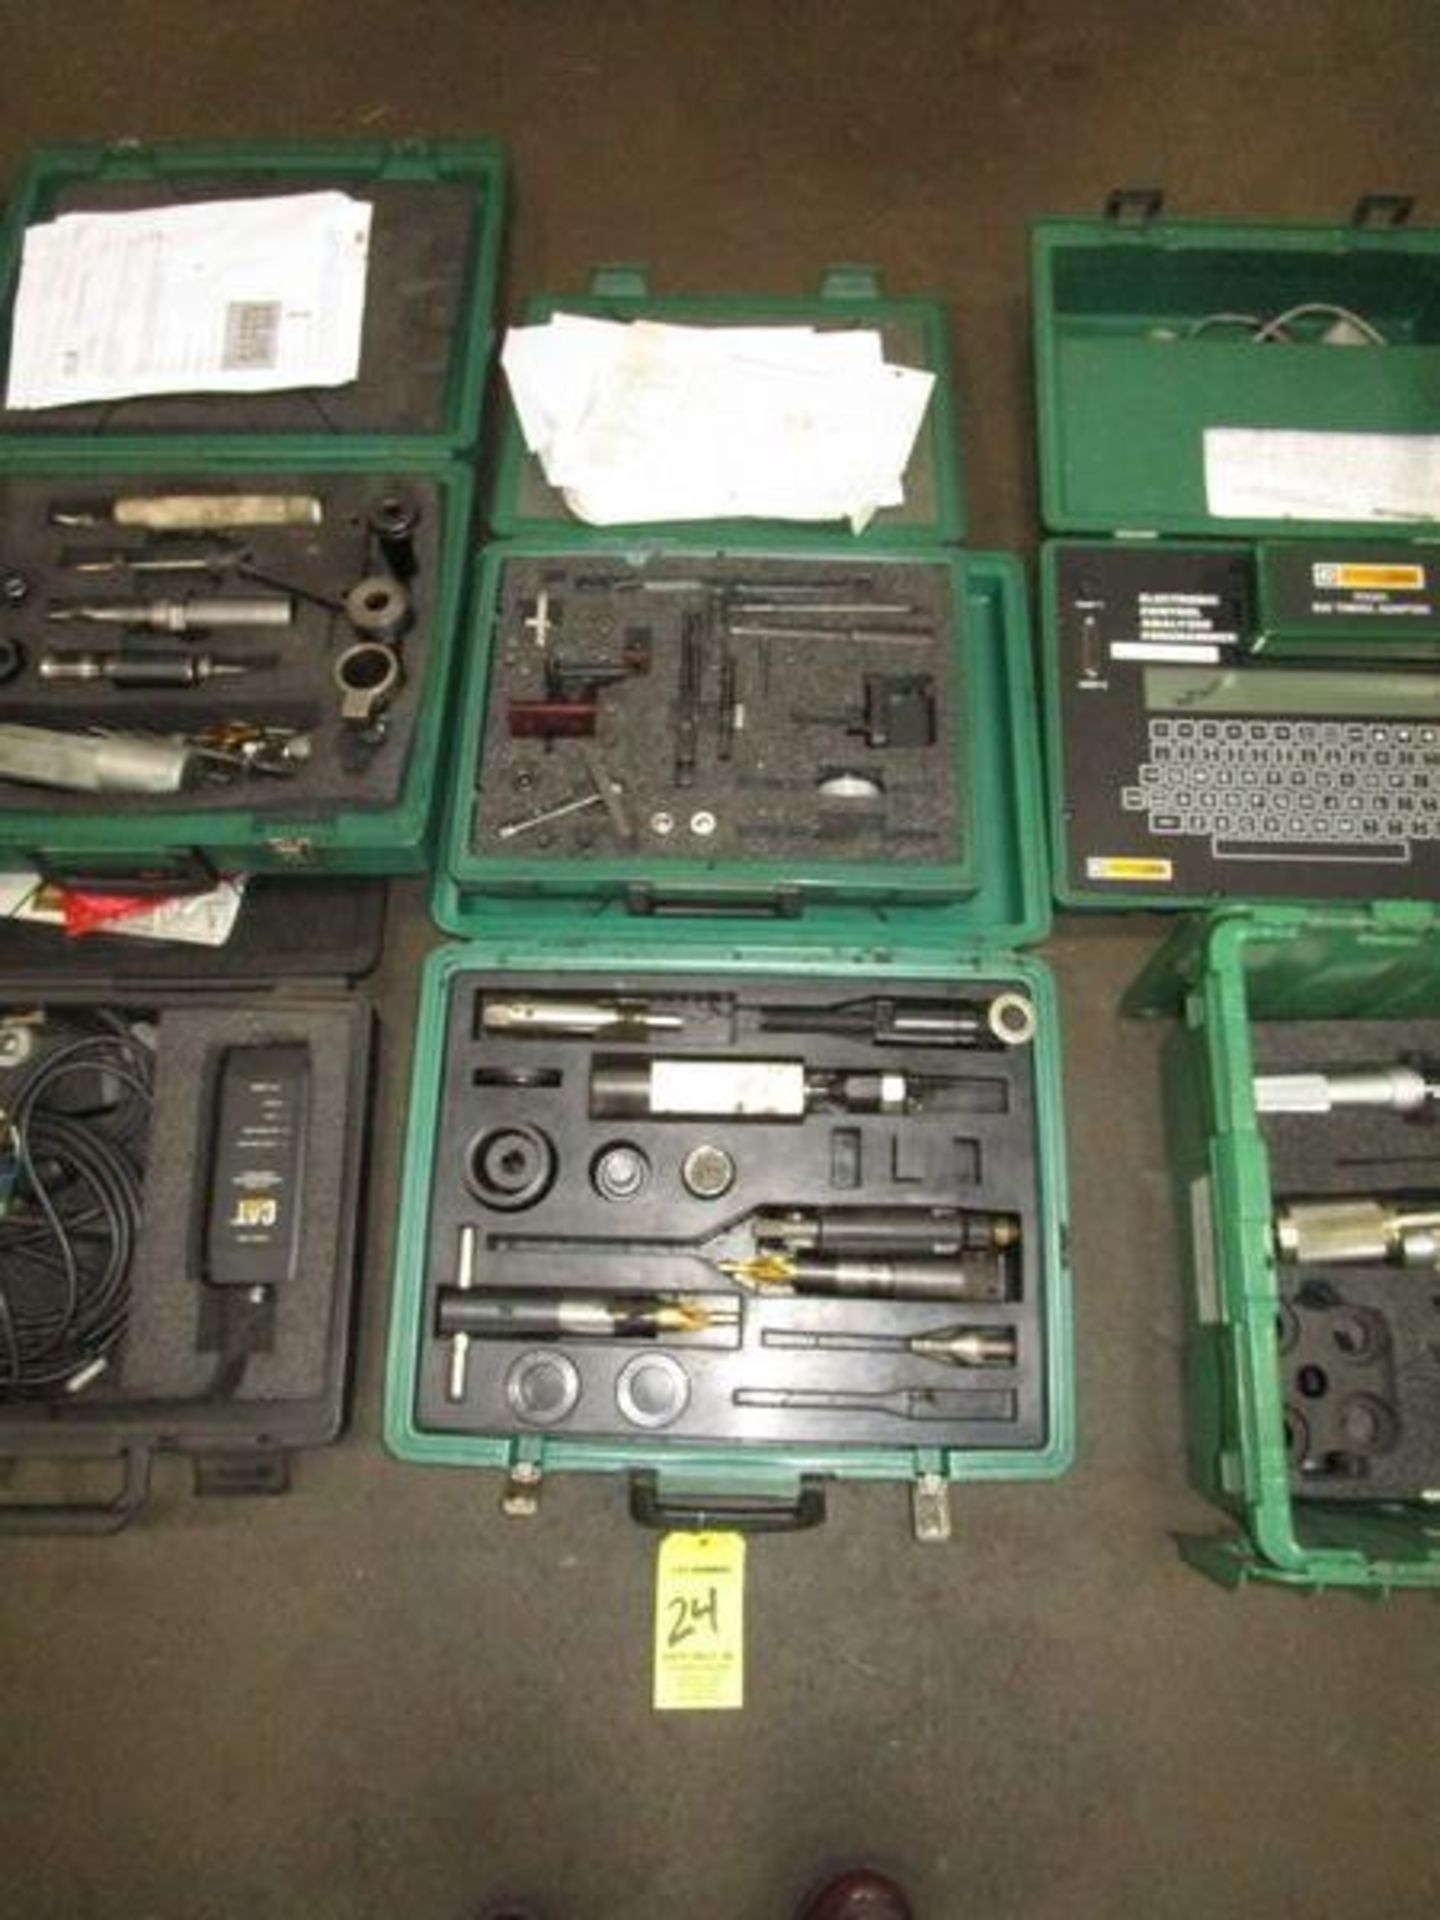 LOT Assorted Cat 3406E, C15, C16 Engine Tooling, 3406E Injector Sleeve Tooling, Analyzer Programmer, - Image 3 of 4